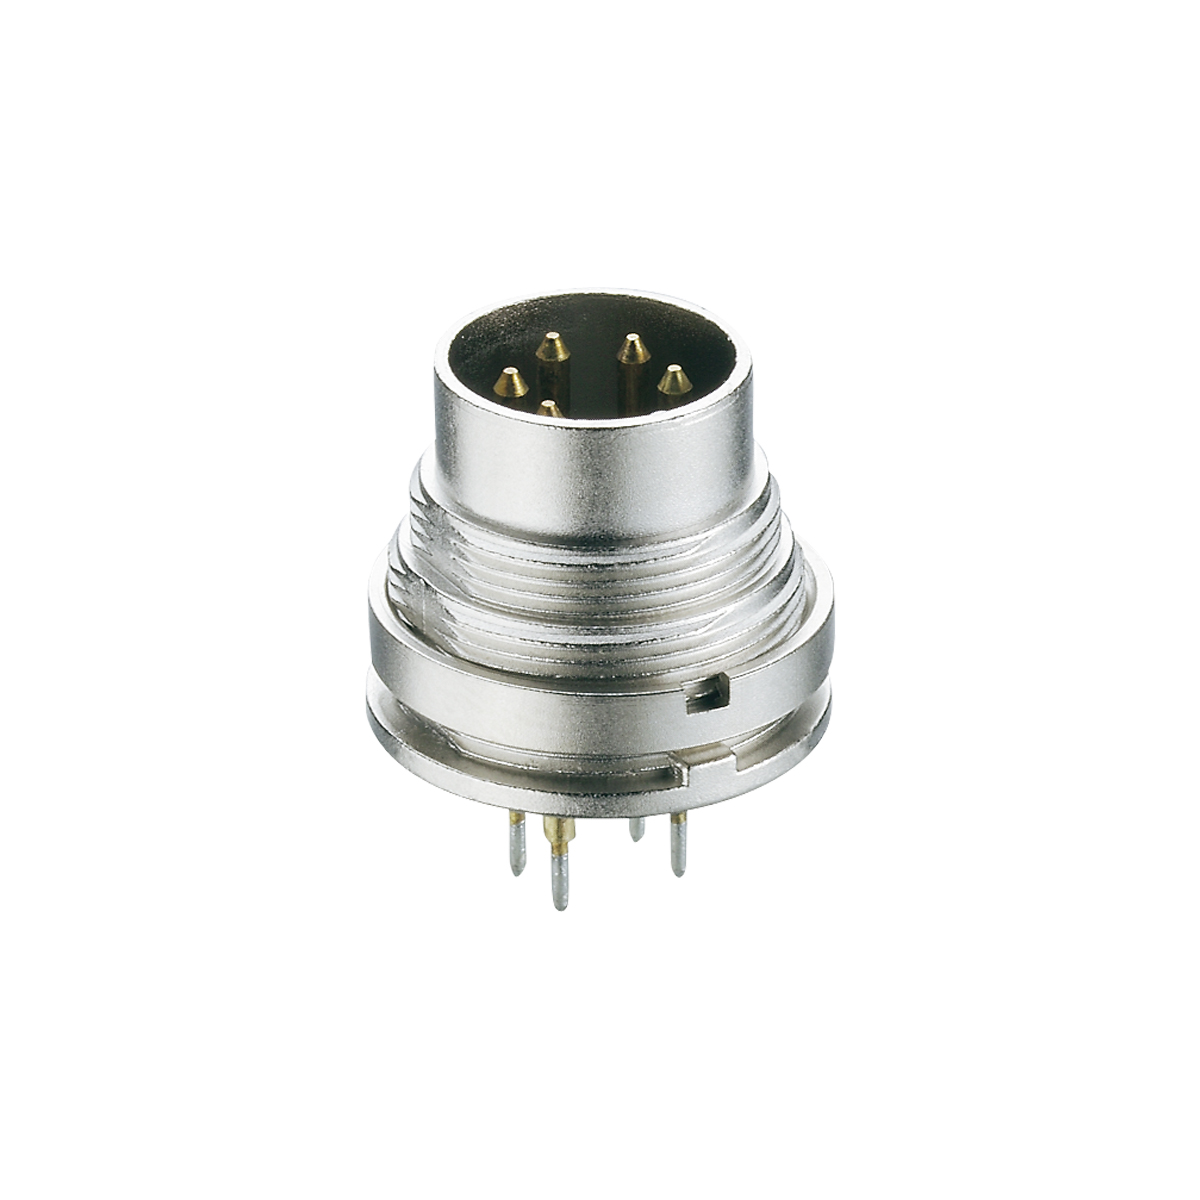 Lumberg: SGR (Series 03 | Circular connectors with threaded joint M16 acc. to IEC 61076-2-106, IP40/IP68)